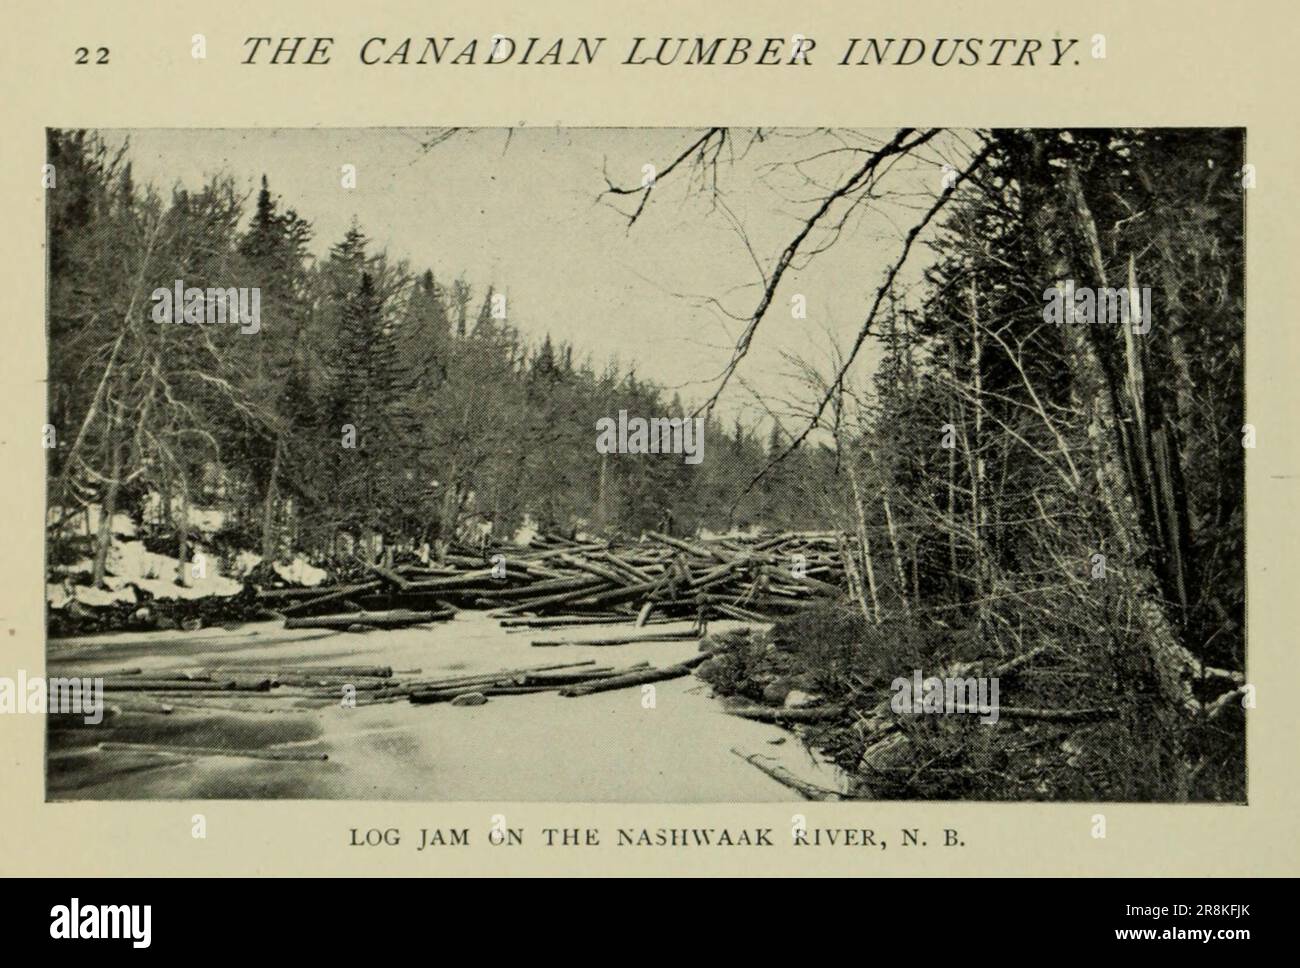 Log Jam on the Nashwaak River N. B. from the Article THE CANADIAN LUMBER INDUSTRY. by J. S. Robertson from The Engineering Magazine DEVOTED TO INDUSTRIAL PROGRESS Volume X October 1896 NEW YORK The Engineering Magazine Co Stock Photo